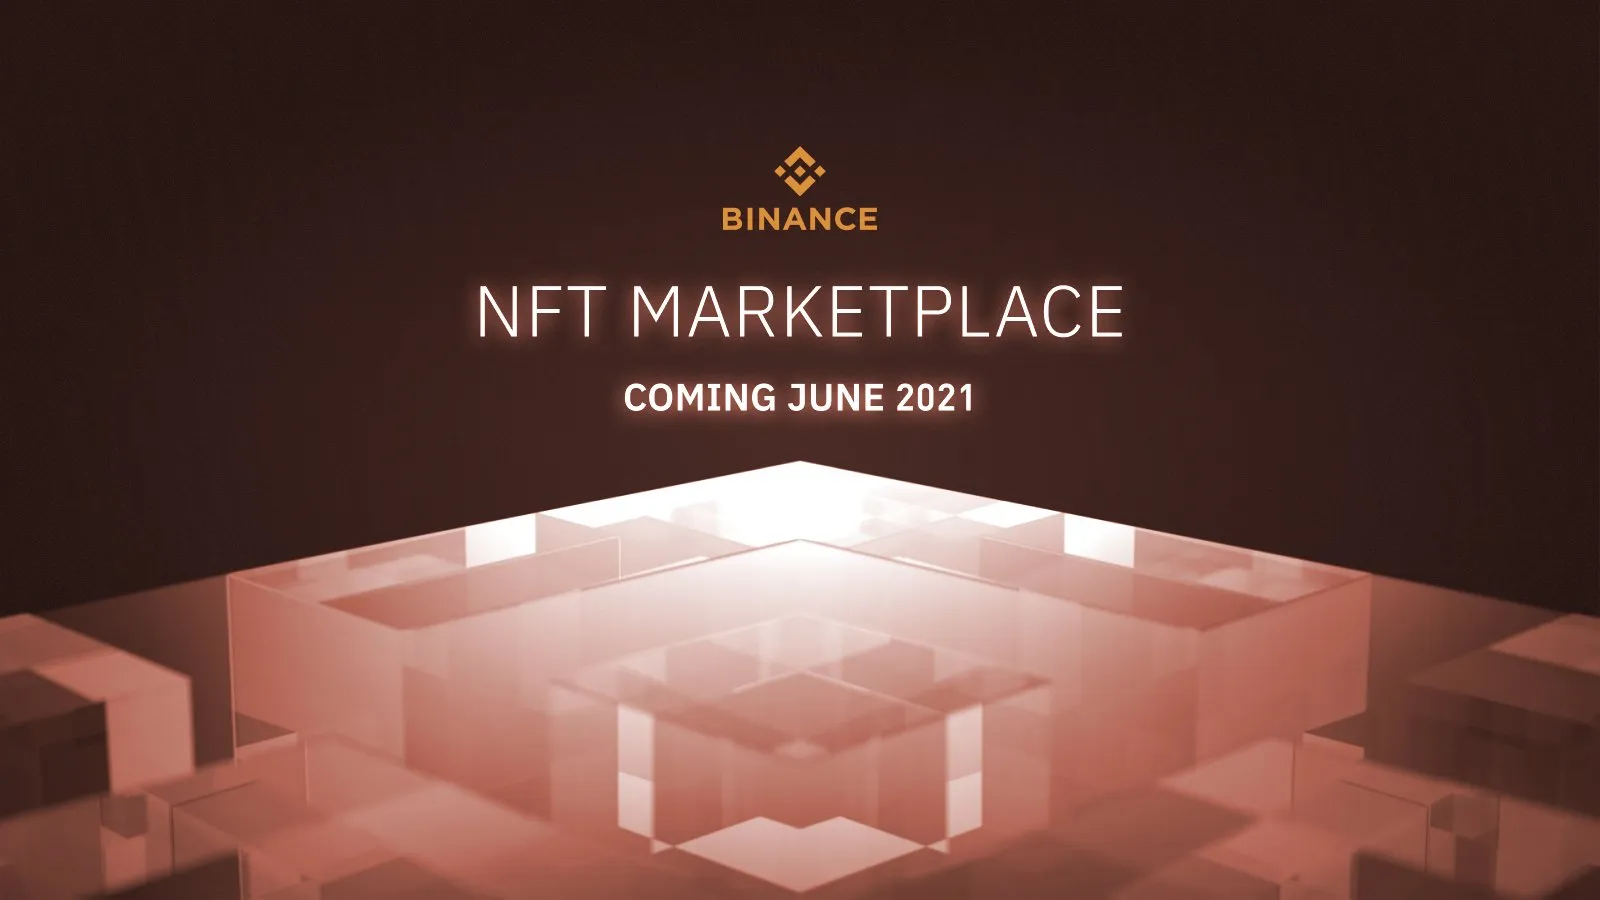 Binance's NFT marketplace will be launched in June. Image: Binance